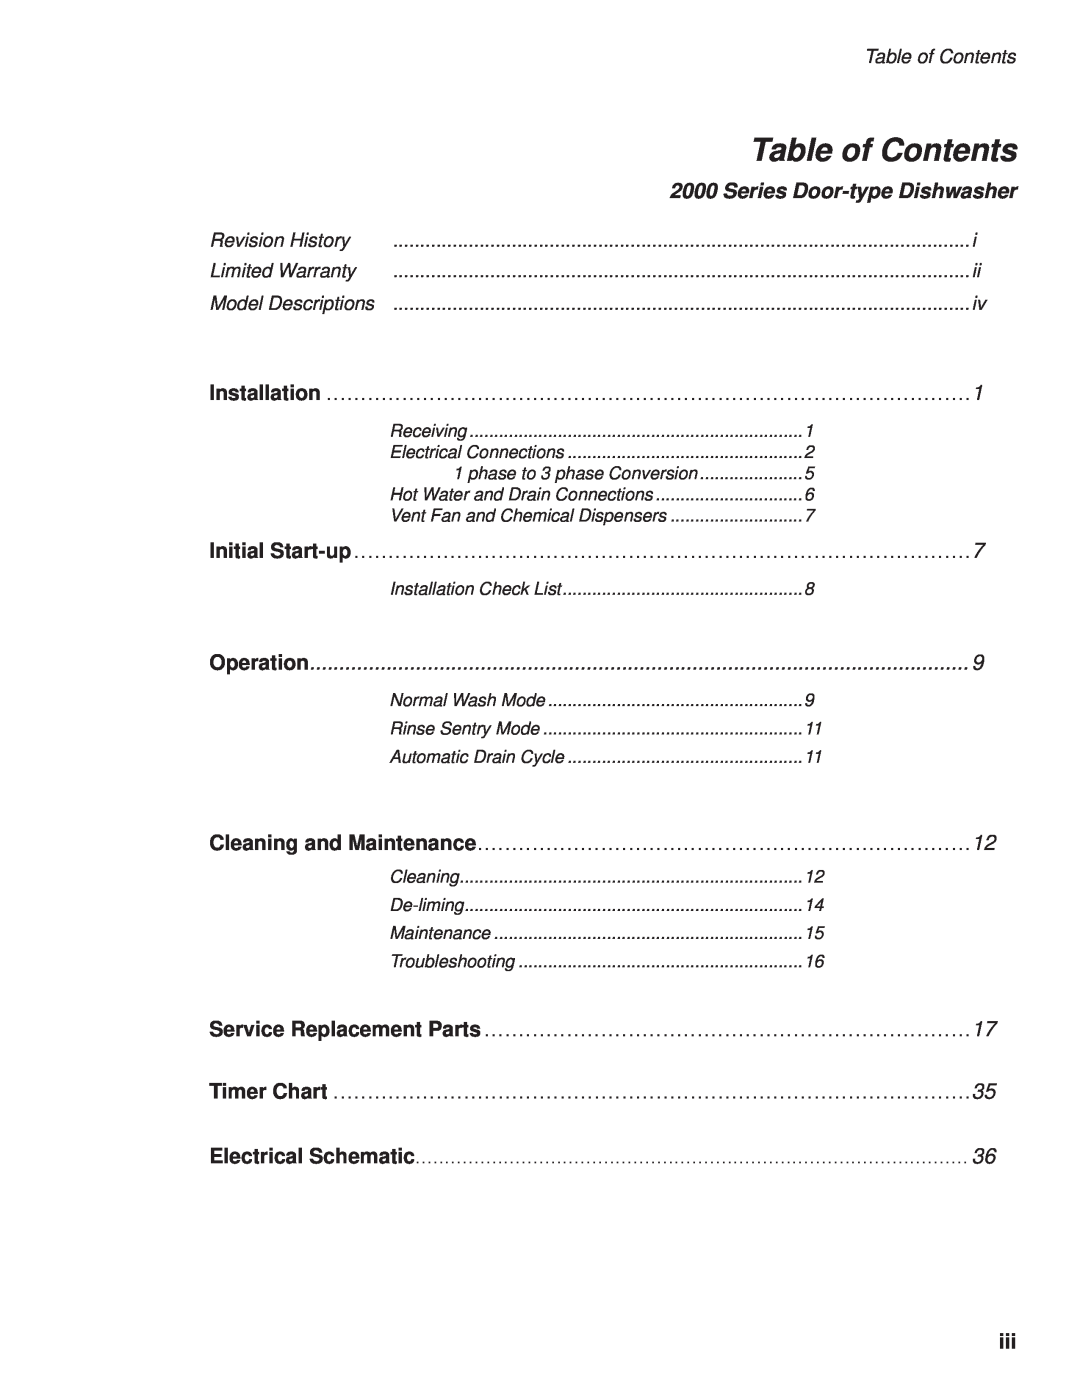 GE DH2000 operation manual Table of Contents, Series Door-type Dishwasher 